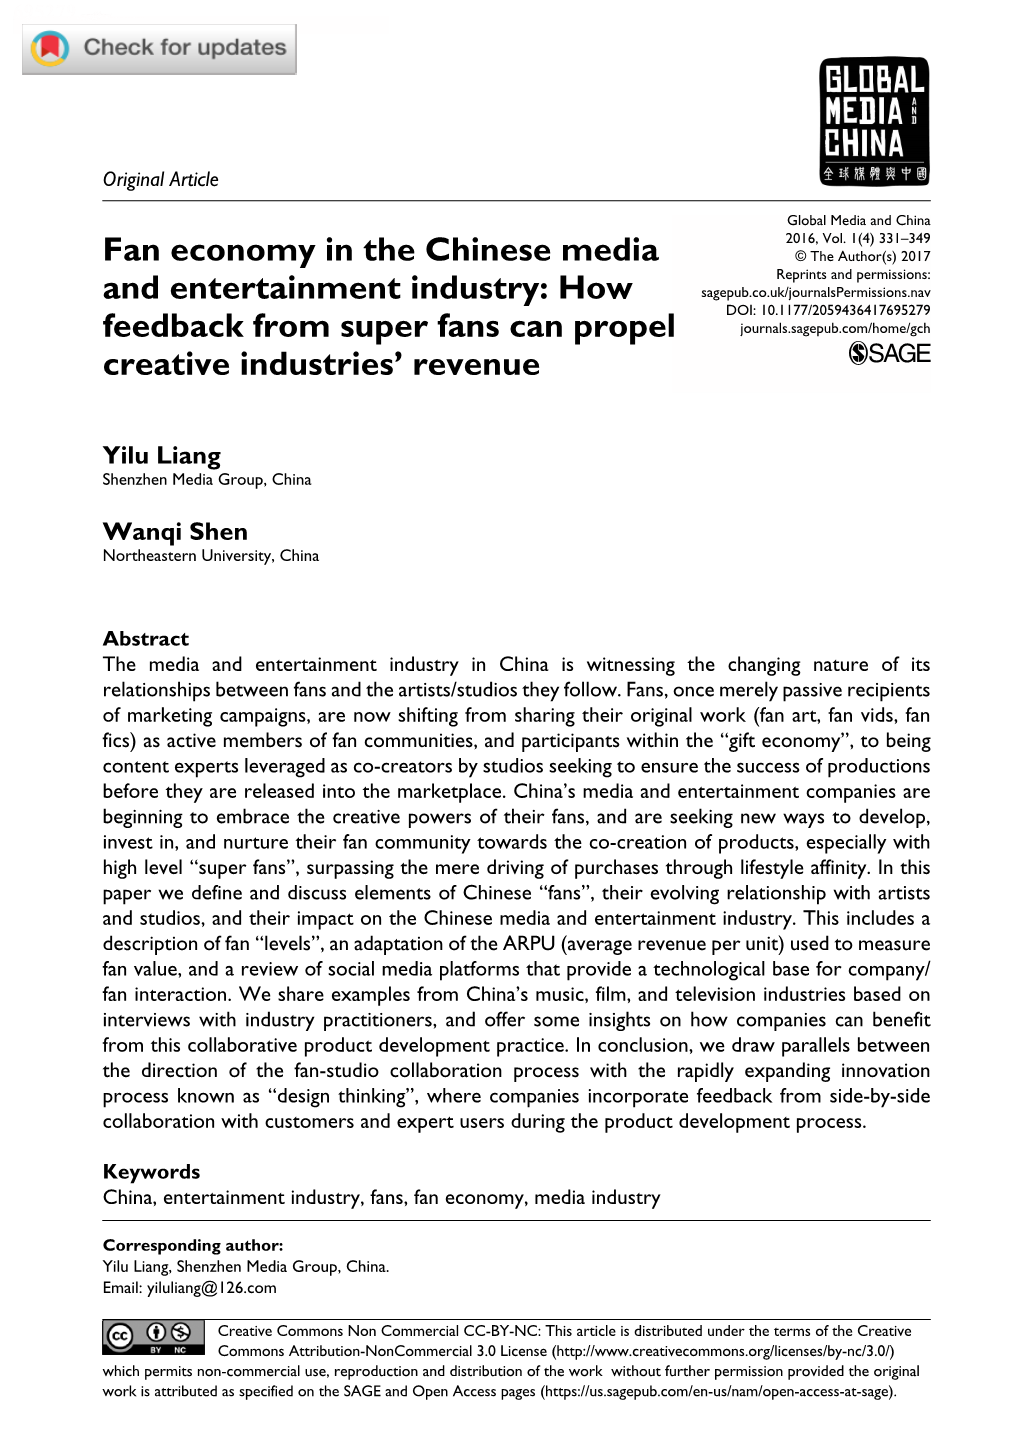 Fan Economy in the Chinese Media and Entertainment Industry: How